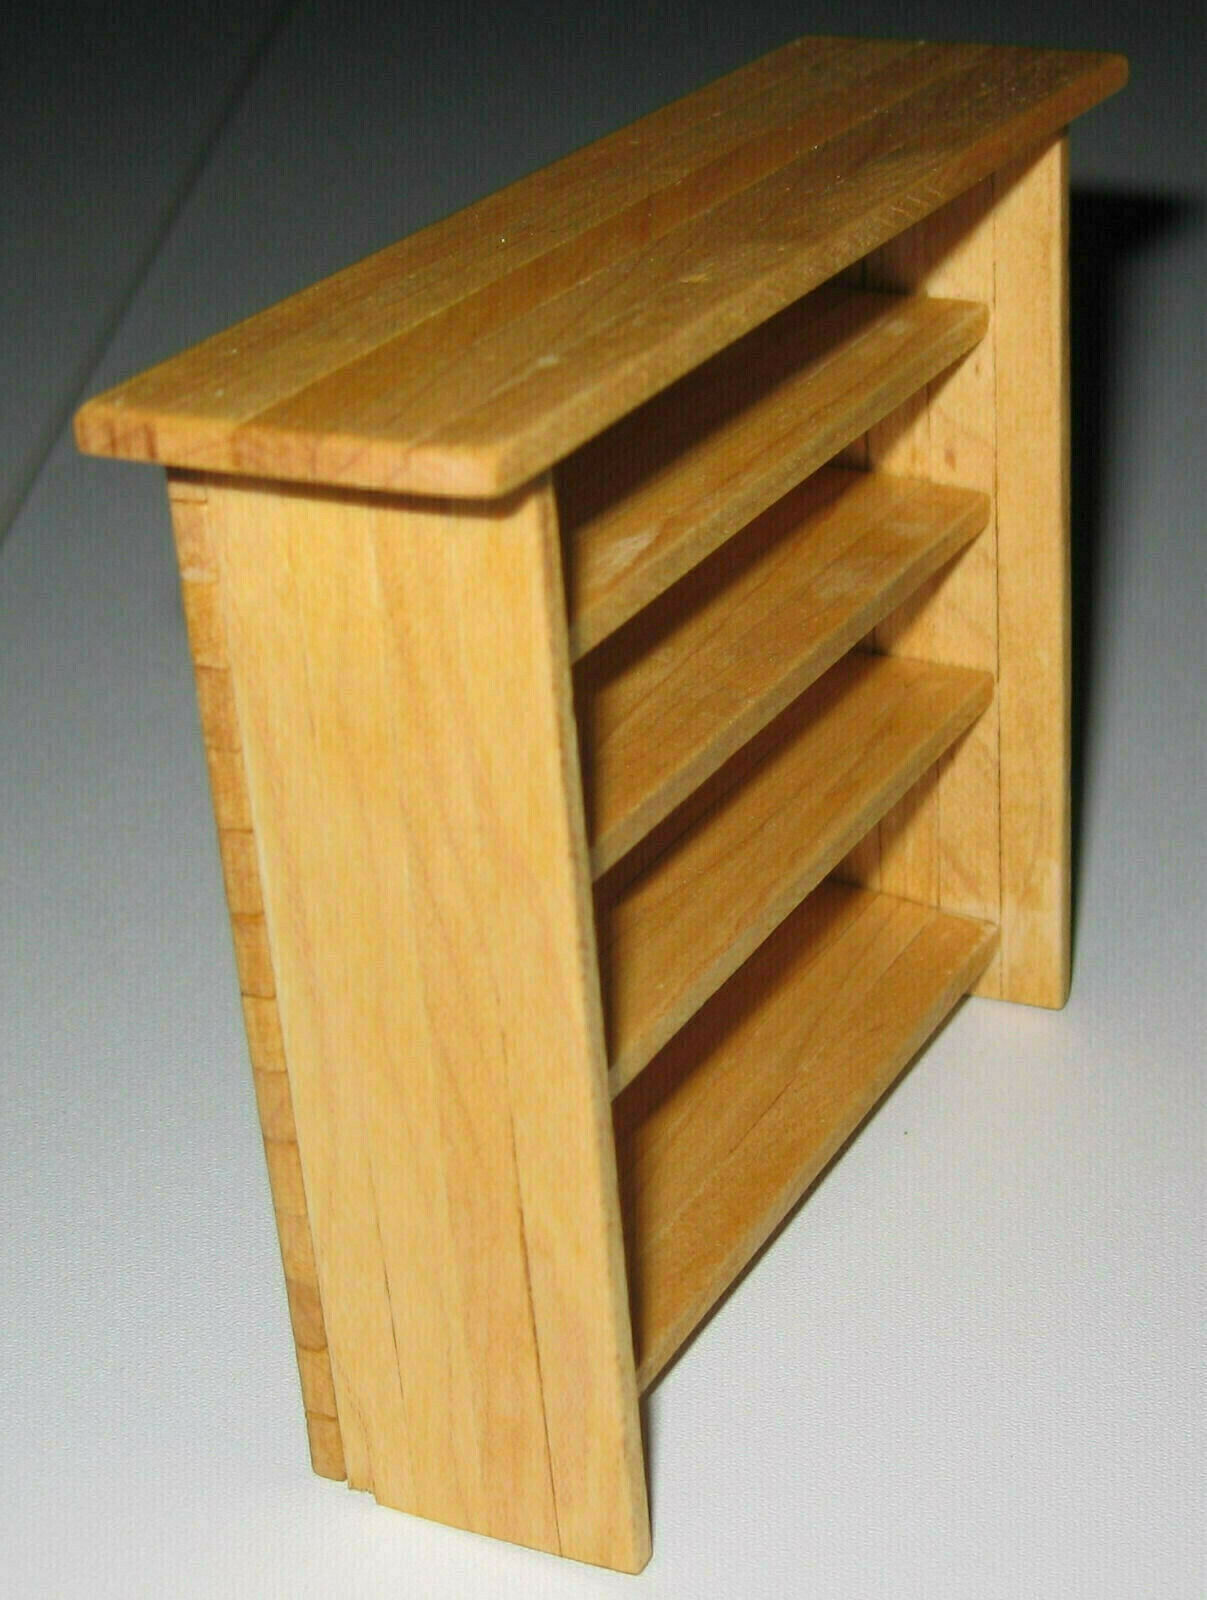 1:12 Scale Miniature Bookcase solid MAPLE wood Artisan-signed OOAK for any room - $30.00